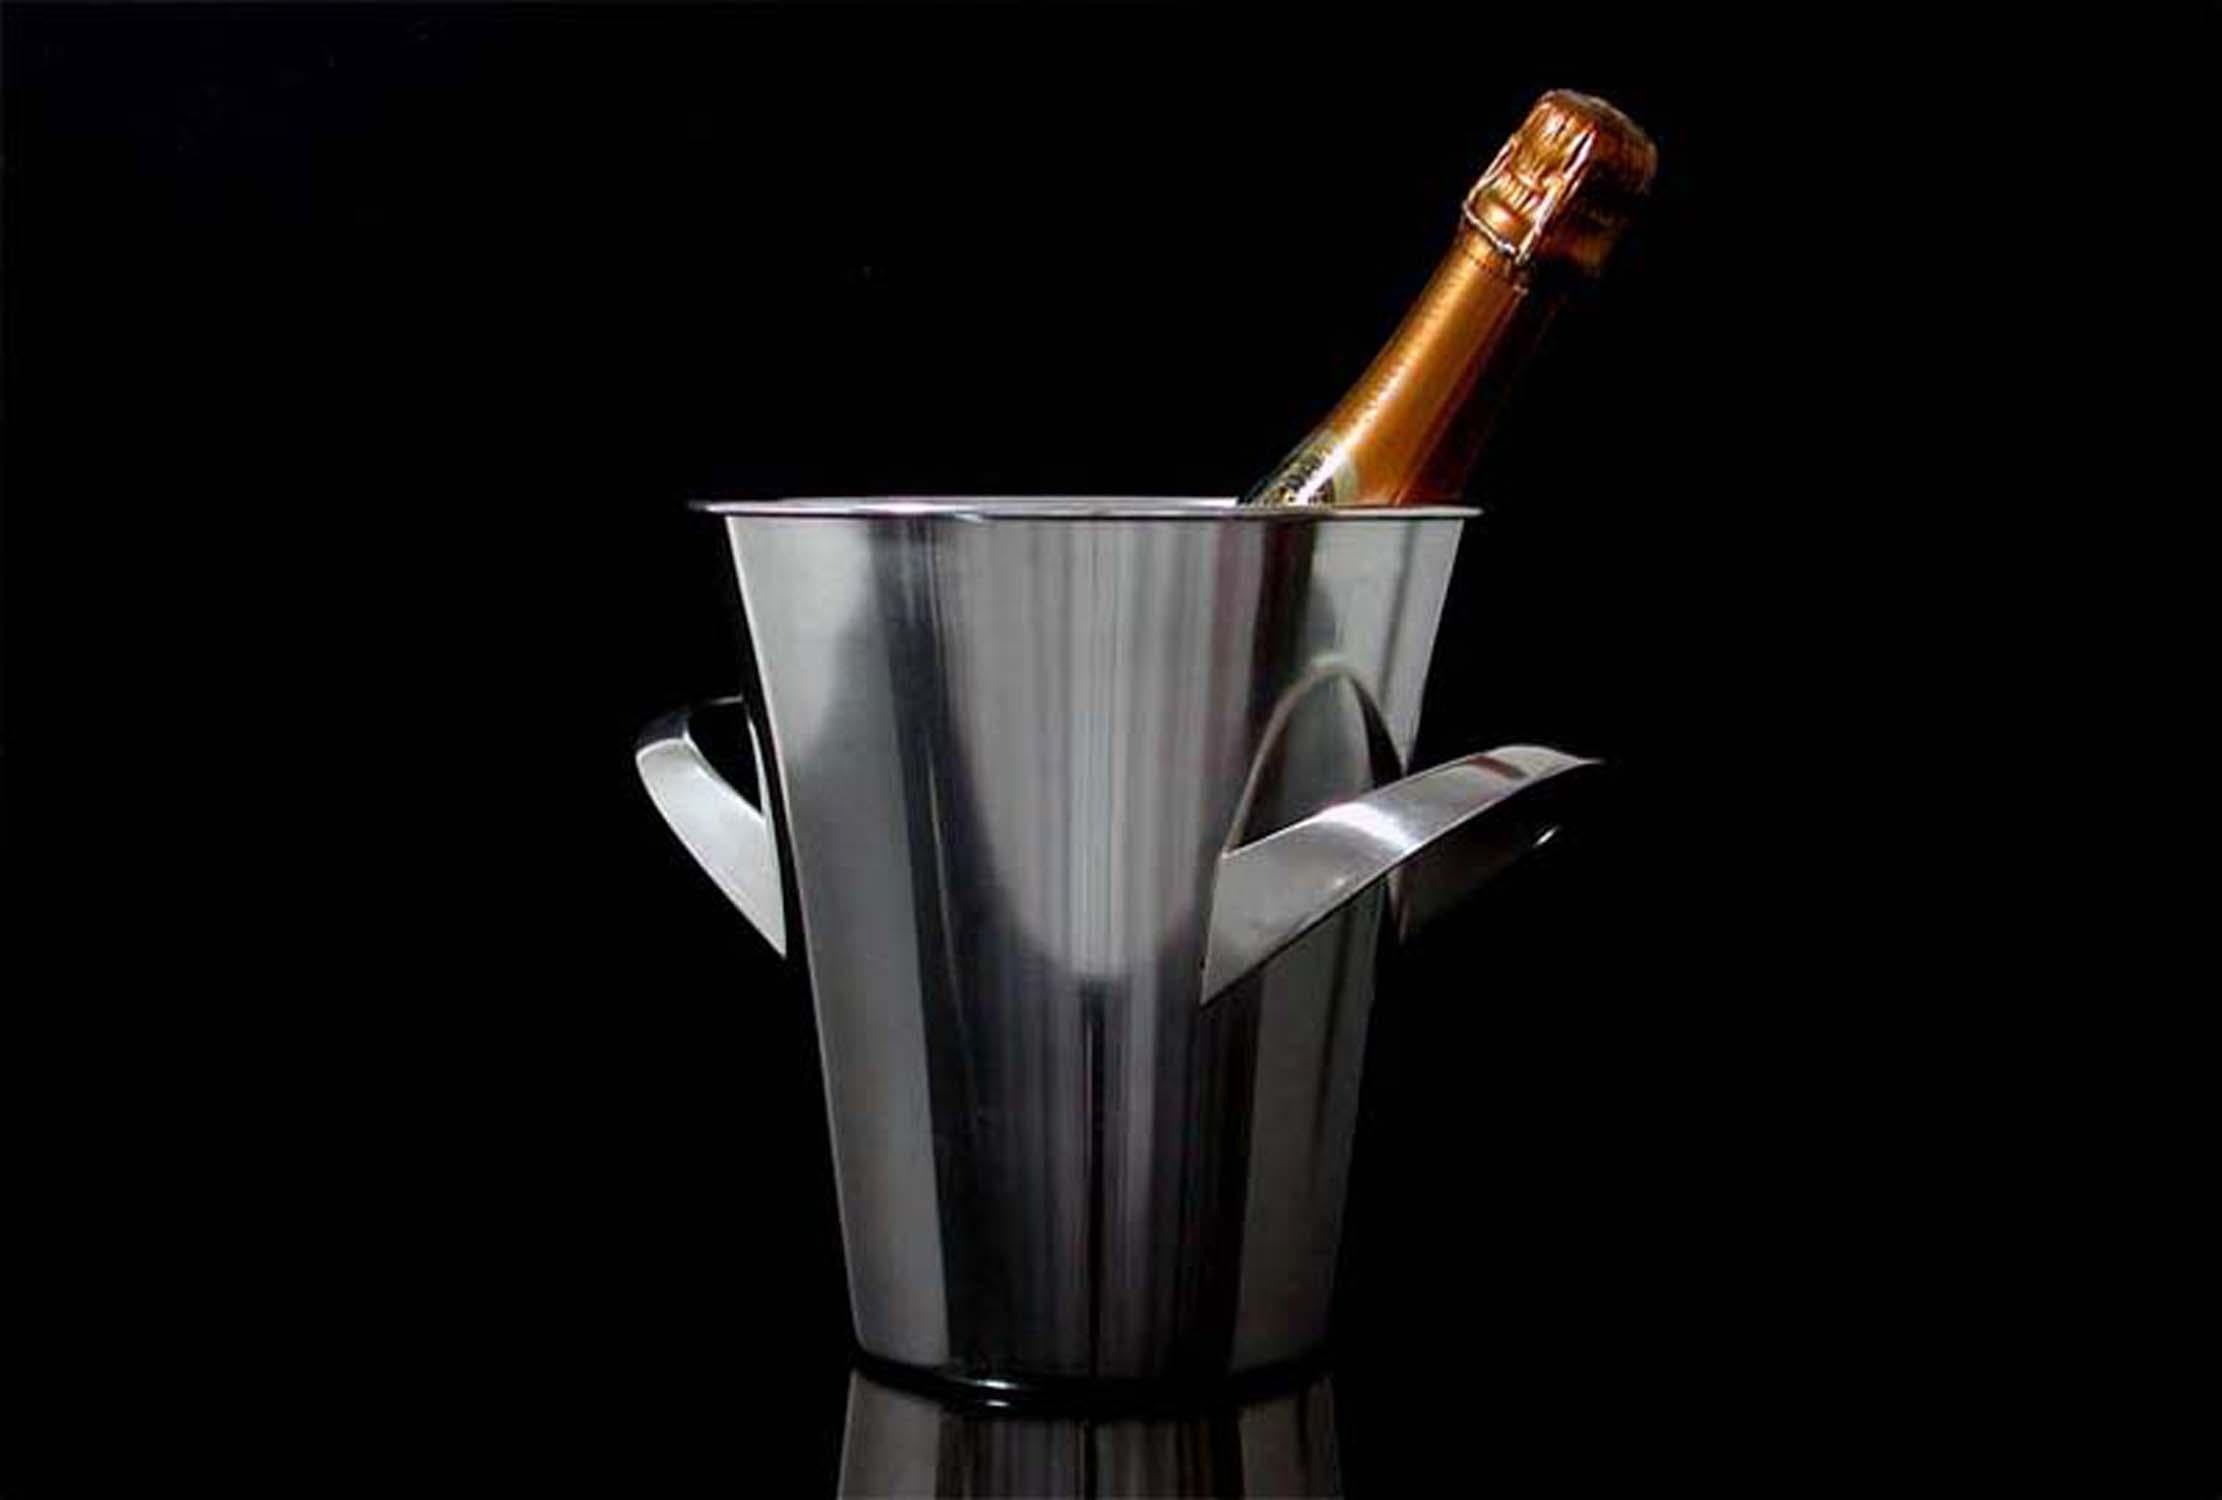 Mid-Century Modern Midcentury WMF Silver Plated Ice Bucket Wine Cooler by Kurt Mayer, 1950s For Sale